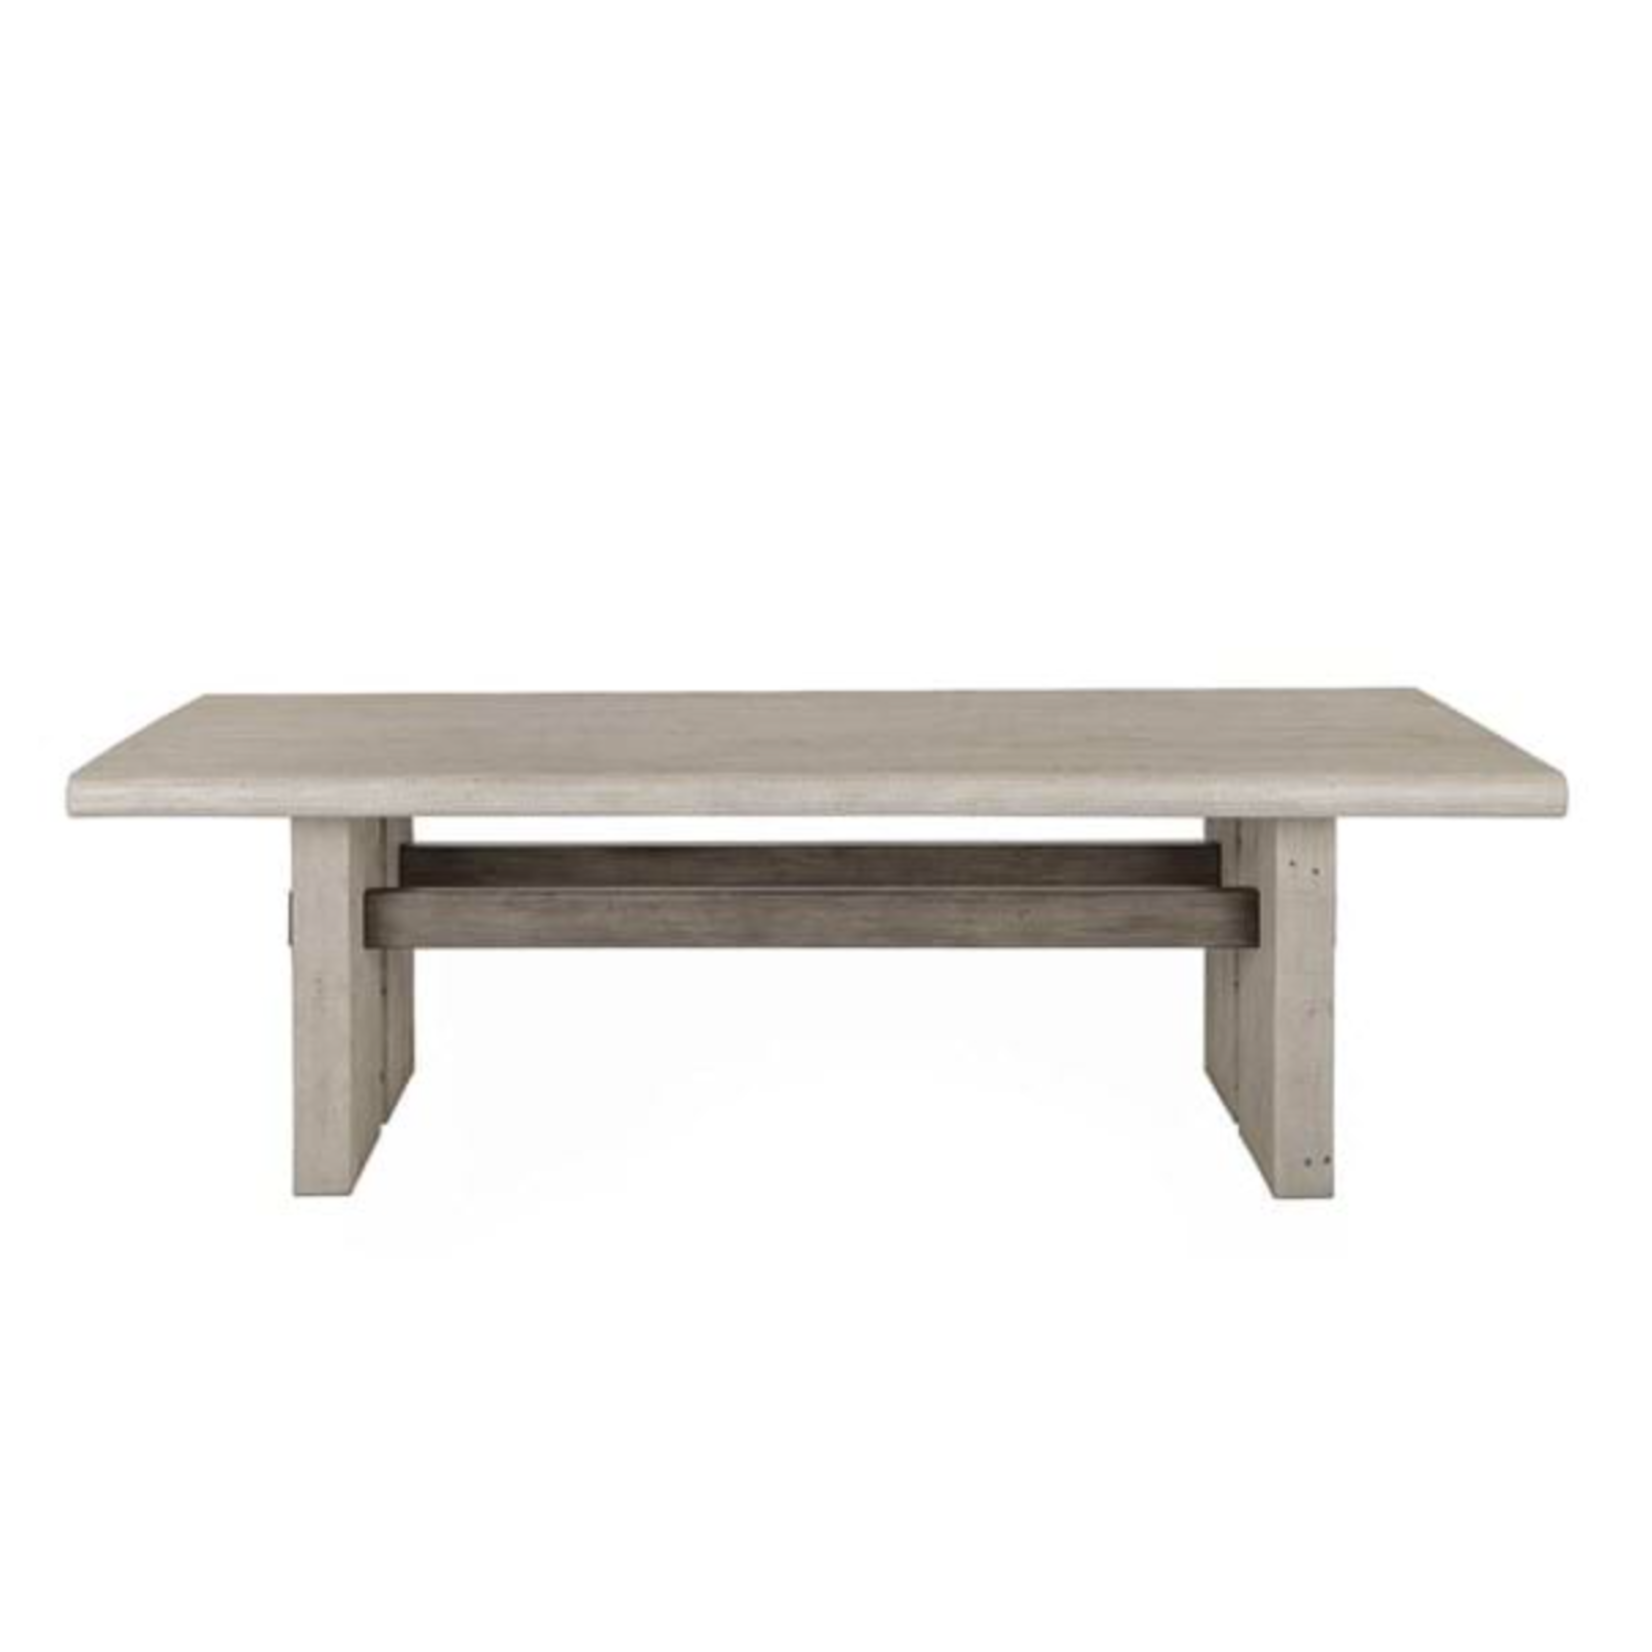 Outside The Box 96x46 Larson White Wash Reclaimed Pine Dining Table